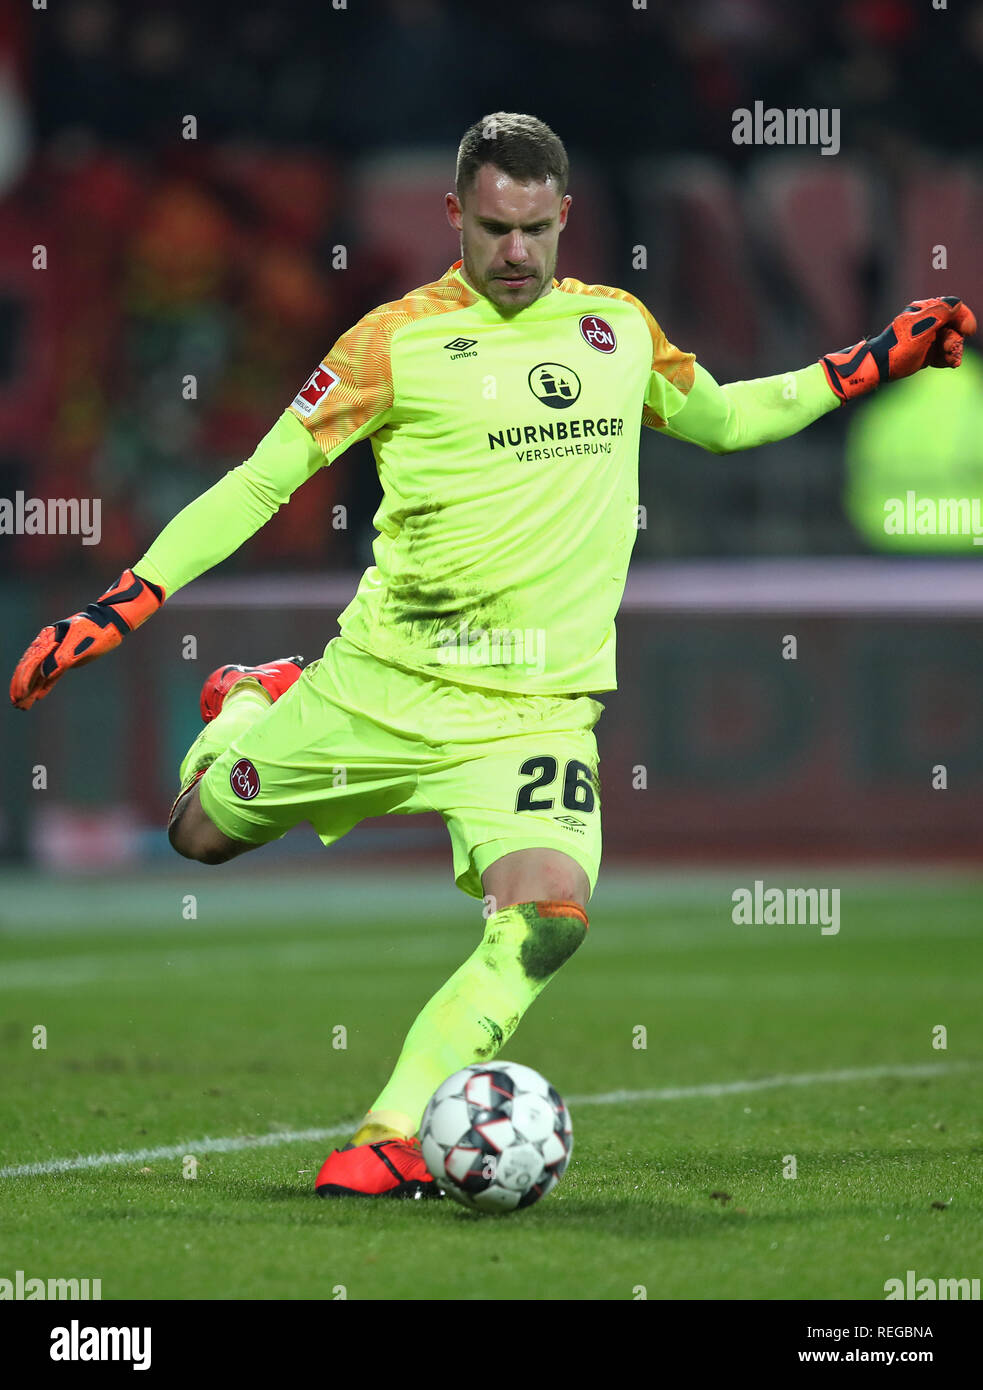 20 January 2019, Bavaria, Nürnberg: Soccer: Bundesliga, 1st FC Nuremberg - Hertha BSC, 18th matchday in Max Morlock Stadium. Nuremberg goalkeeper Christian Mathenia plays the ball. Photo: Daniel Karmann/dpa - IMPORTANT NOTE: In accordance with the requirements of the DFL Deutsche Fußball Liga or the DFB Deutscher Fußball-Bund, it is prohibited to use or have used photographs taken in the stadium and/or the match in the form of sequence images and/or video-like photo sequences. Stock Photo